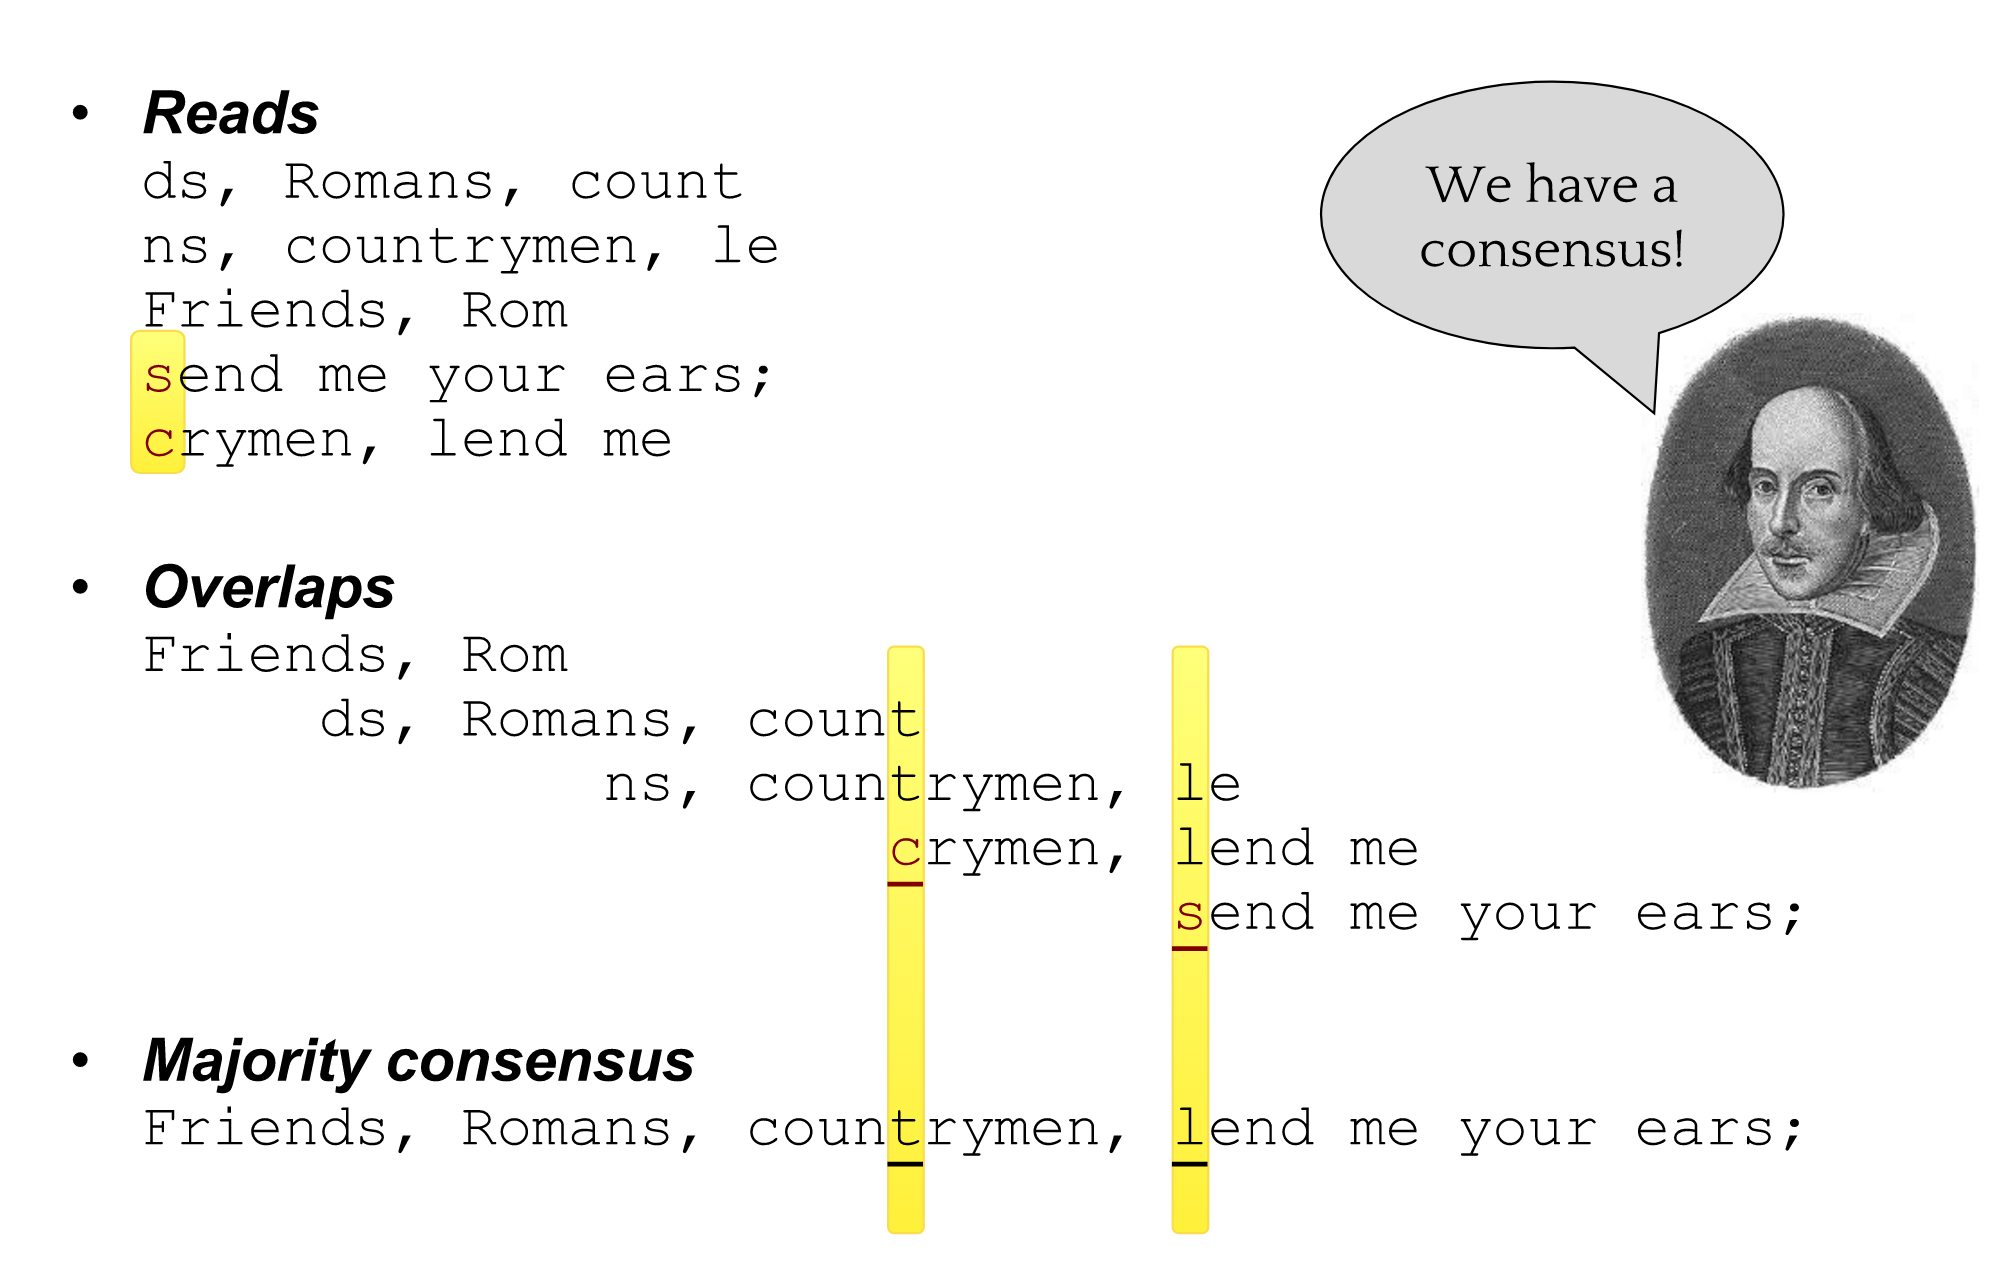 Finally a "majority consensus" is shown below the overlaps, in two other reads we saw count and countrymen, in addition to our crymen. So that makes 2/3 that have the correct text, and we go with the majority. The same is done for the other typo. Shakespeare says We have a consensus!